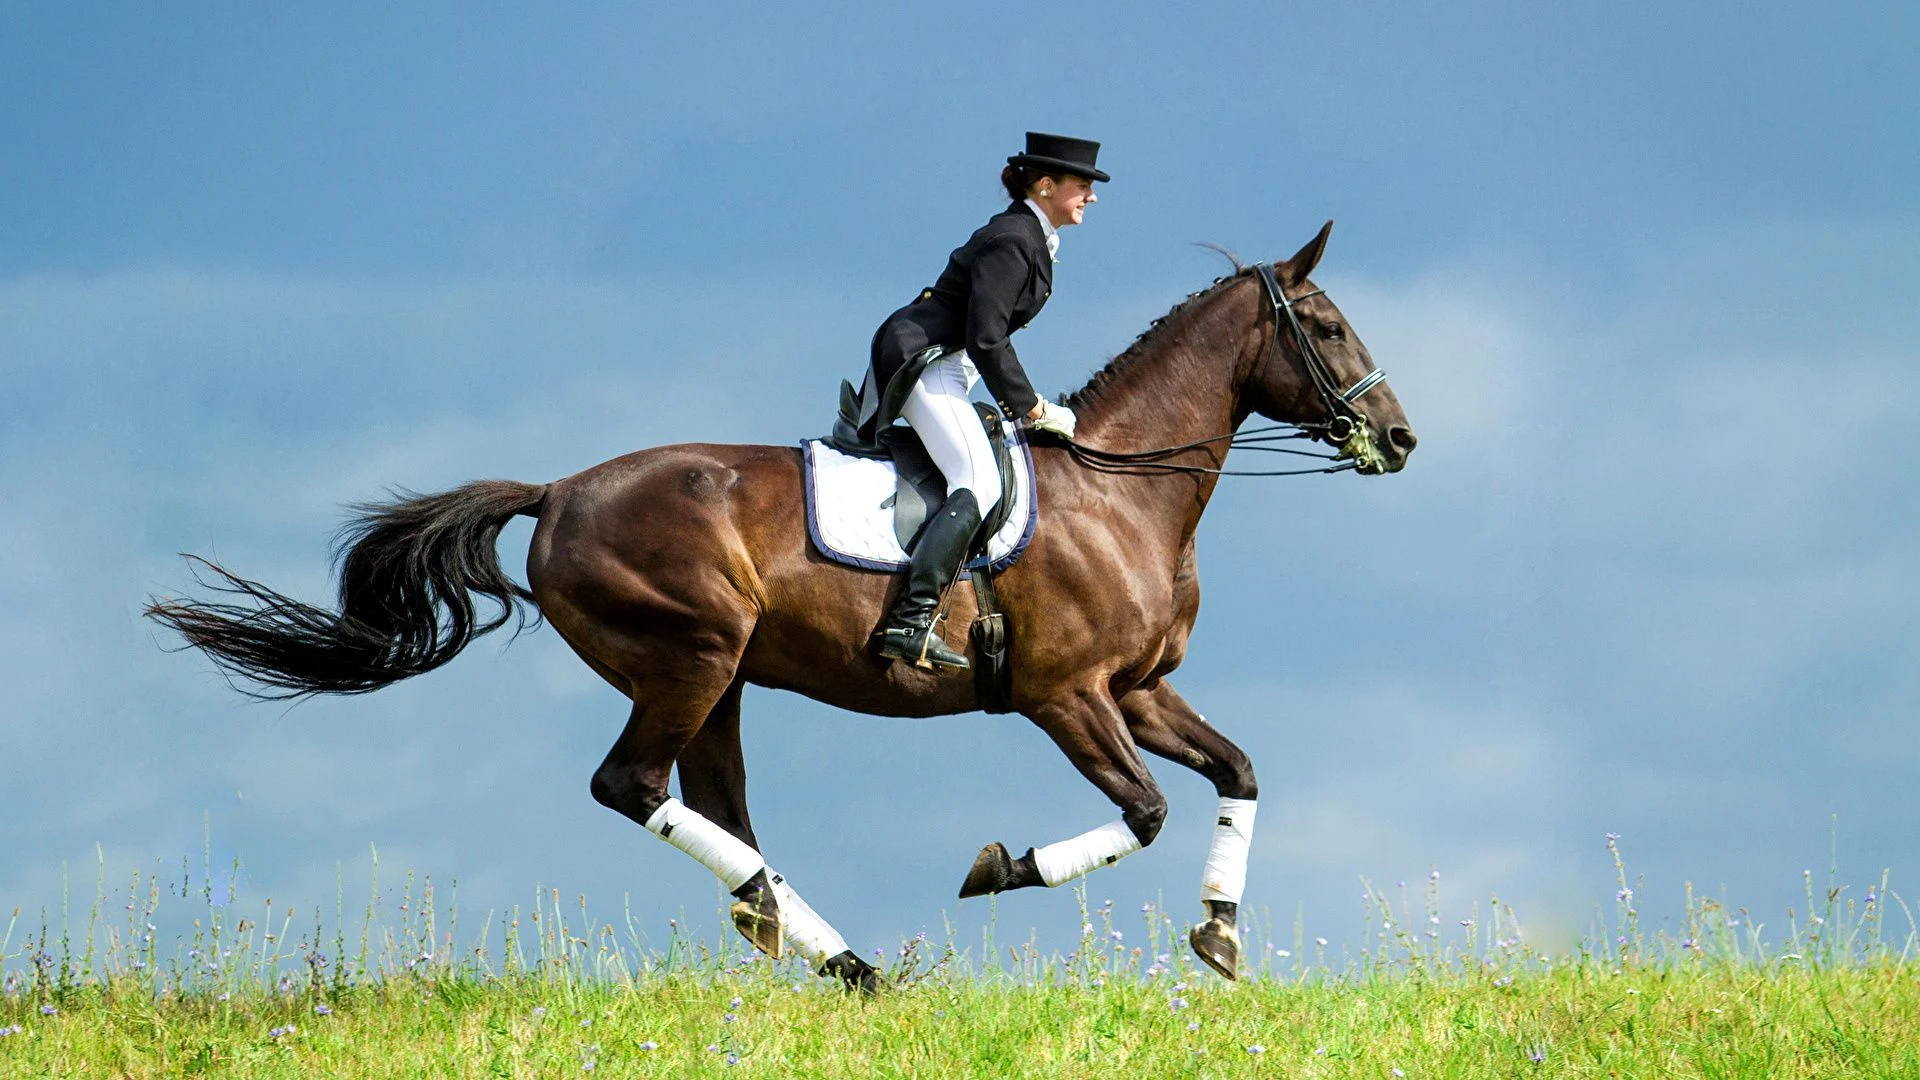 Eventing: Saddle seat style of equestrian activity, A traditional English style of horse riding. 1920x1080 Full HD Wallpaper.